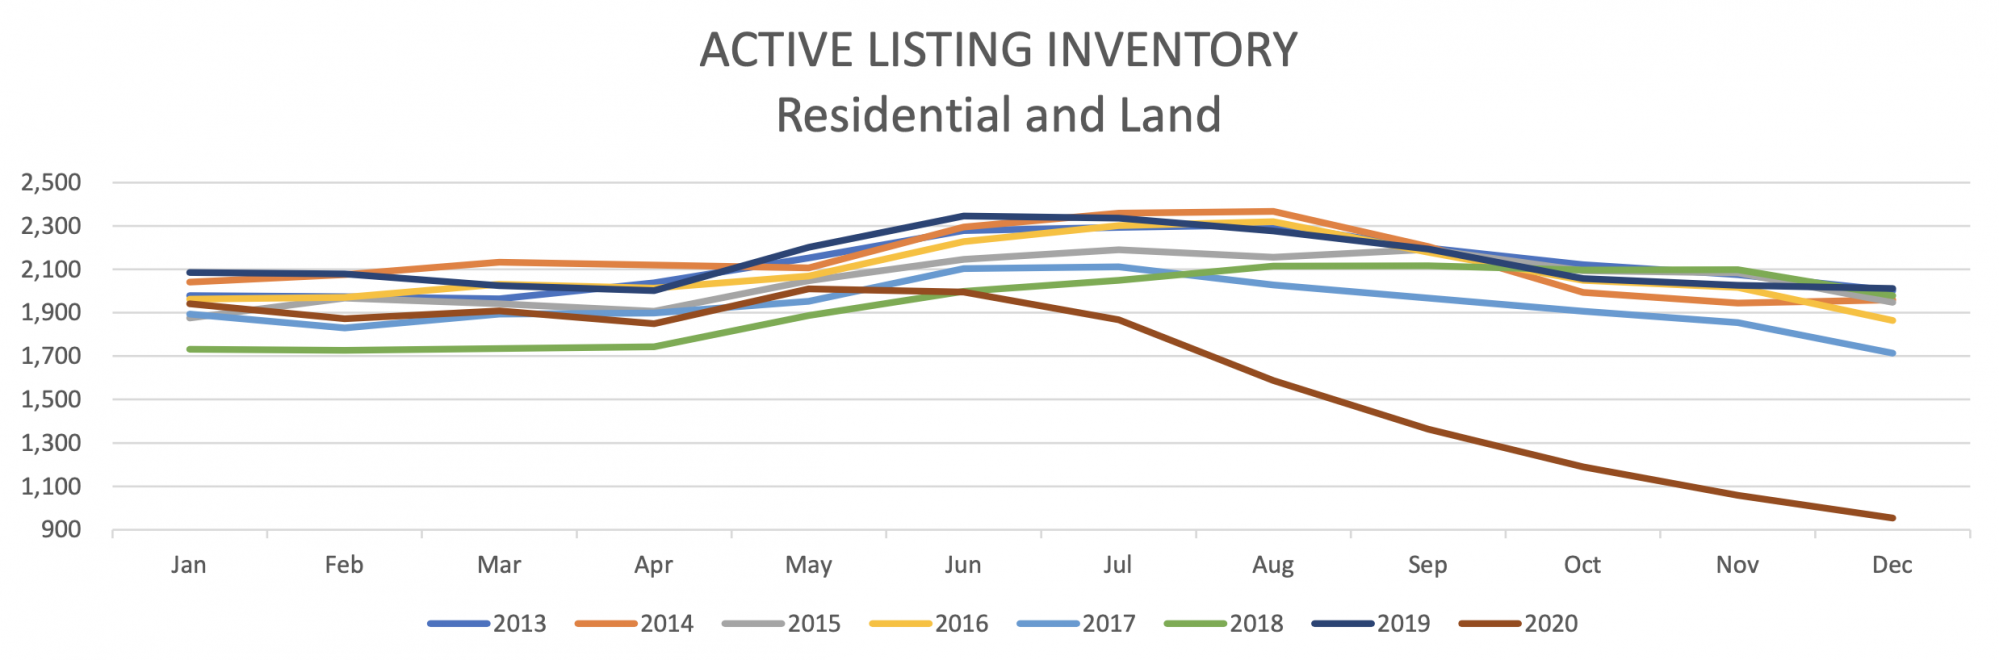 Savvy Park City Homeowners Take Advantage of Historically Low Inventory Levels